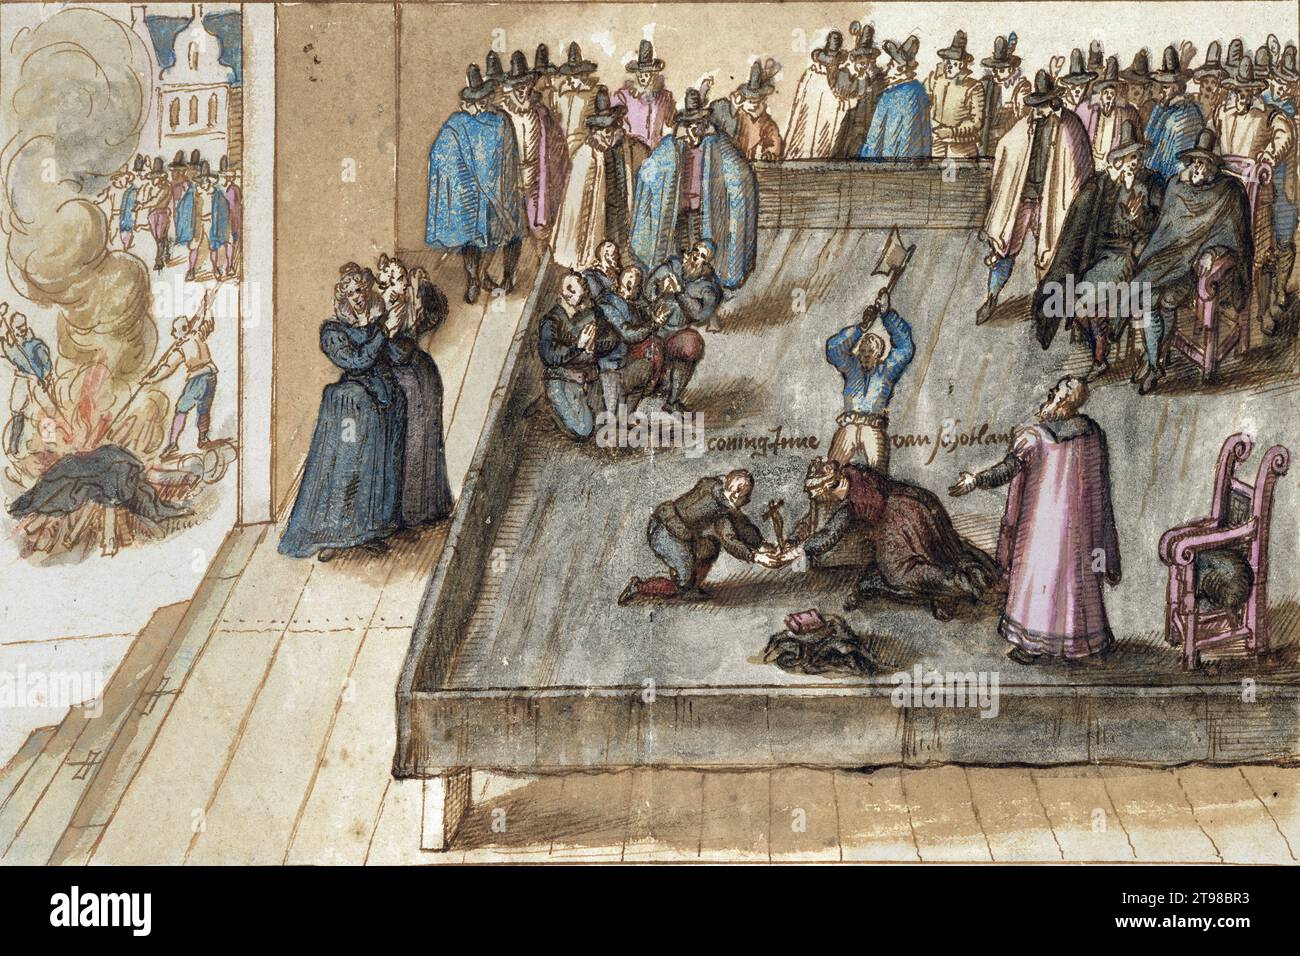 The Execution of Mary Queen of Scots on 8th Februay 1587, watercolour by unkown artist, c. 1613 Stock Photo